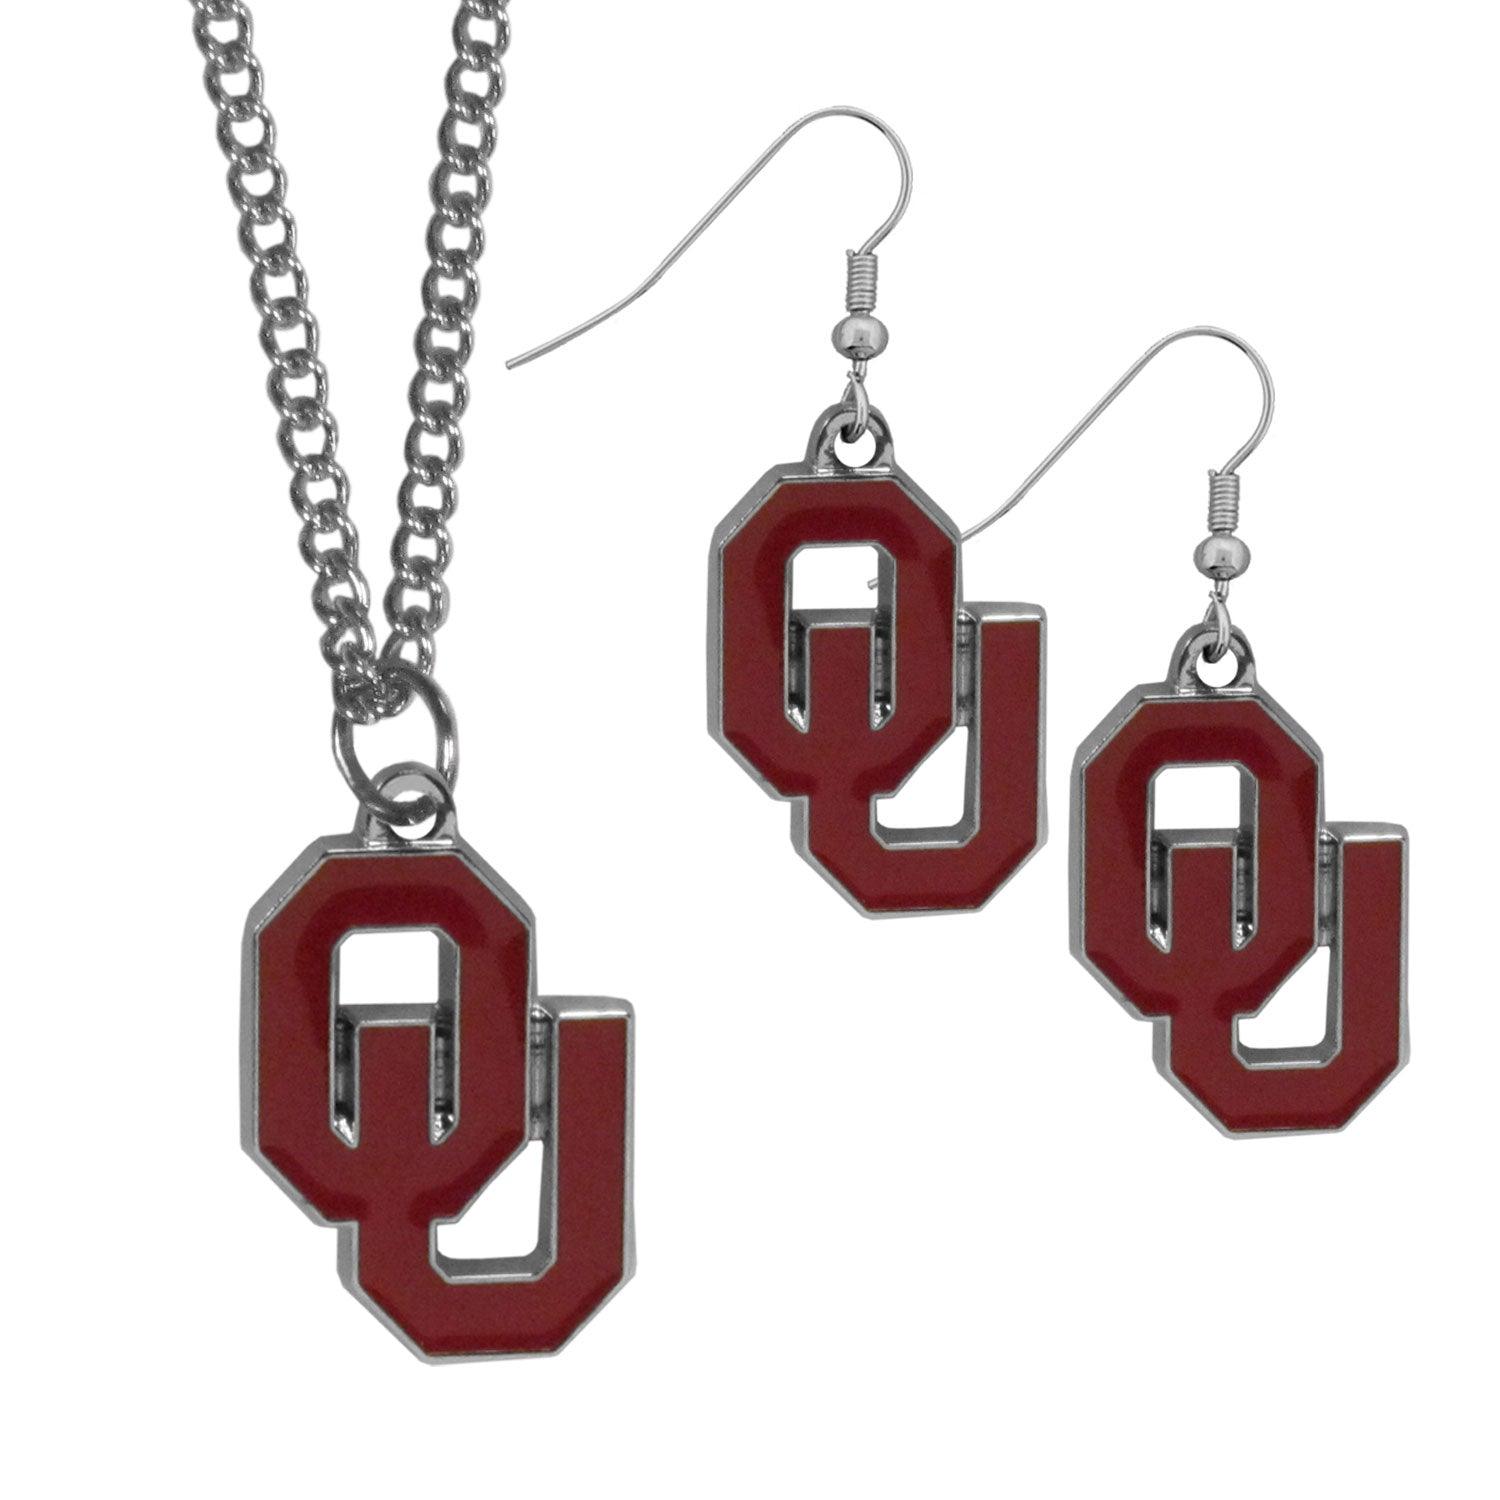 Oklahoma Sooners Dangle Earrings and Chain Necklace Set - Flyclothing LLC